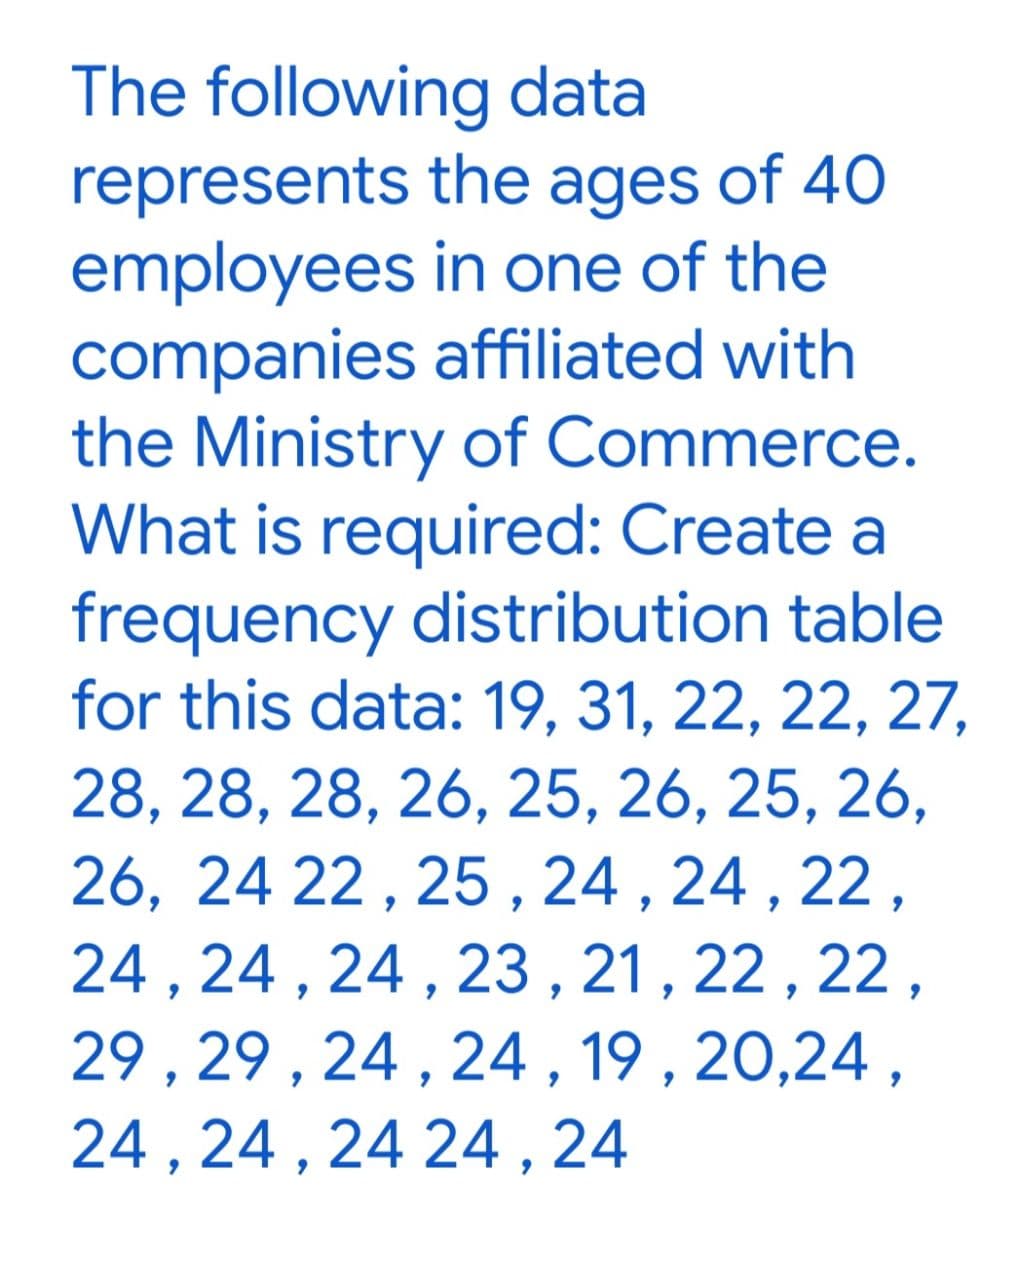 The following data
represents the ages of 40
employees in one of the
companies affiliated with
the Ministry of Commerce.
What is required: Create a
frequency distribution table
for this data: 19, 31, 22, 22, 27,
28, 28, 28, 26, 25, 26, 25, 26,
26, 24 22 , 25 , 24 , 24 , 22,
24, 24 , 24, 23, 21, 22 , 22,
29, 29, 24 , 24, 19 , 20,24 ,
24, 24, 24 24,24
